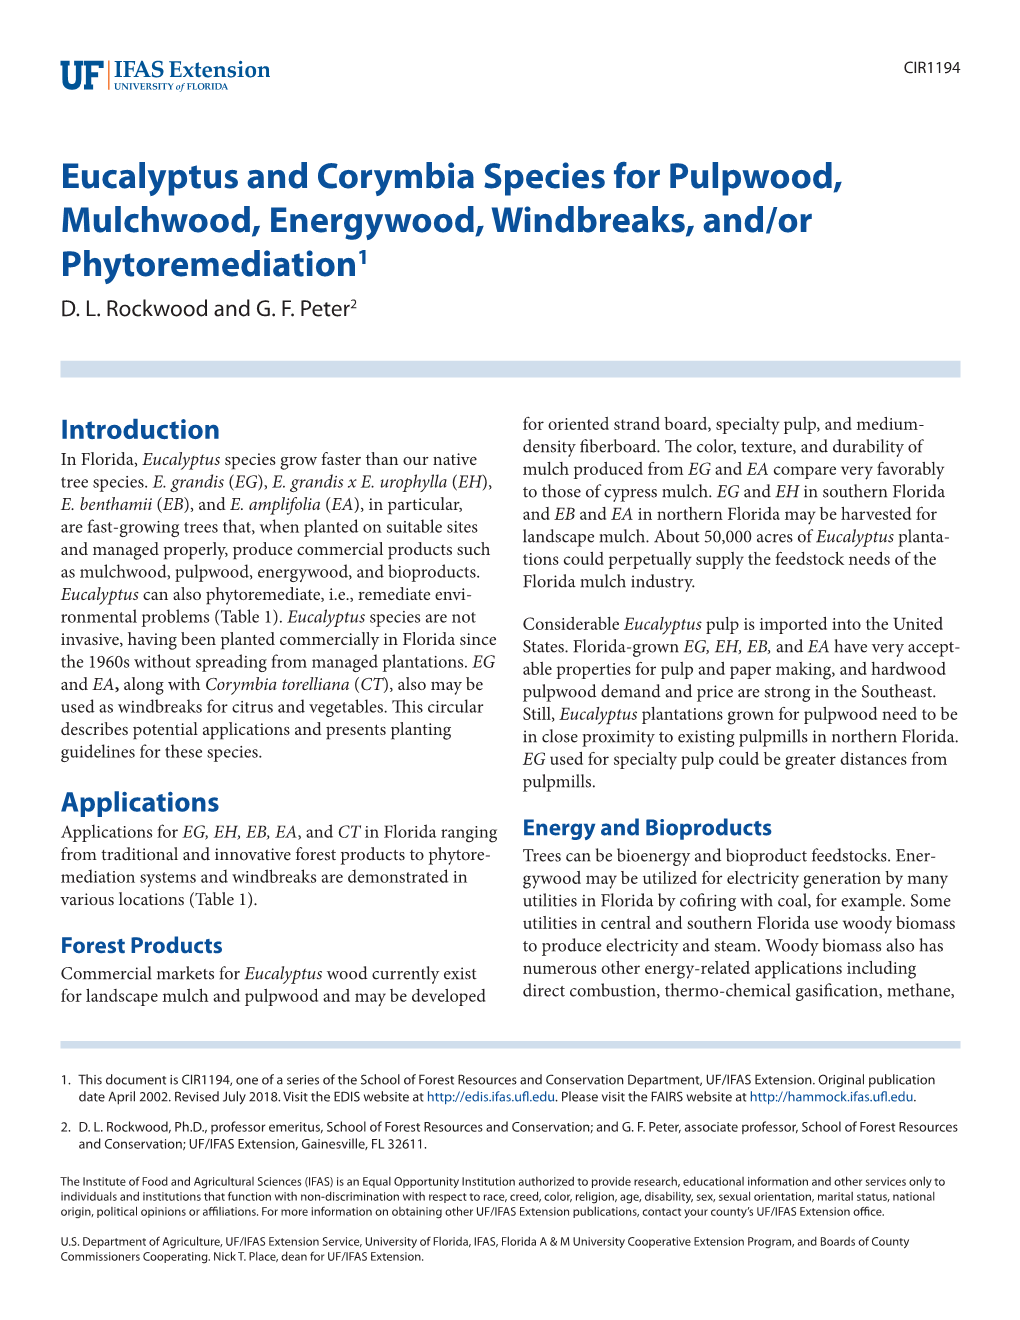 Eucalyptus and Corymbia Species for Pulpwood, Mulchwood, Energywood, Windbreaks, And/Or Phytoremediation1 D